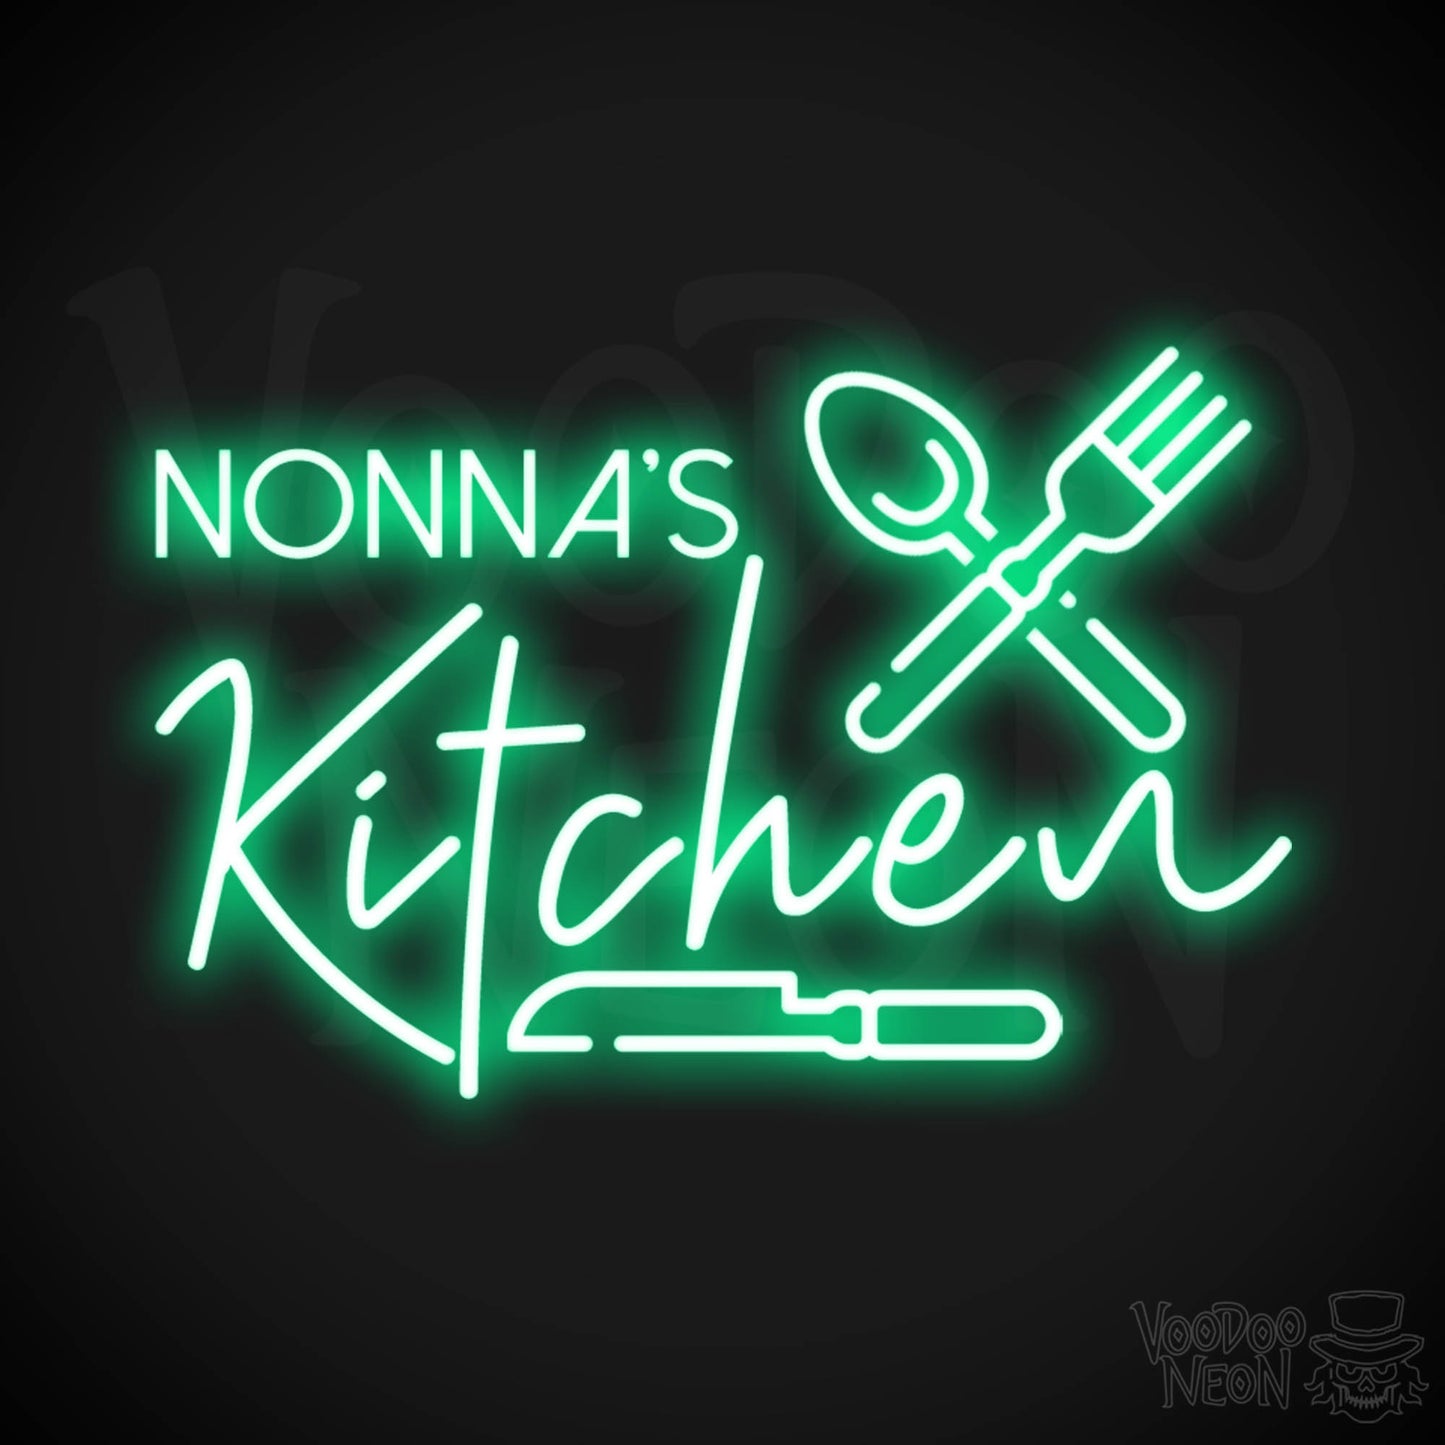 Nonna's Kitchen Neon Sign - Neon Nona's Kitchen Sign - Wall Art - Color Green